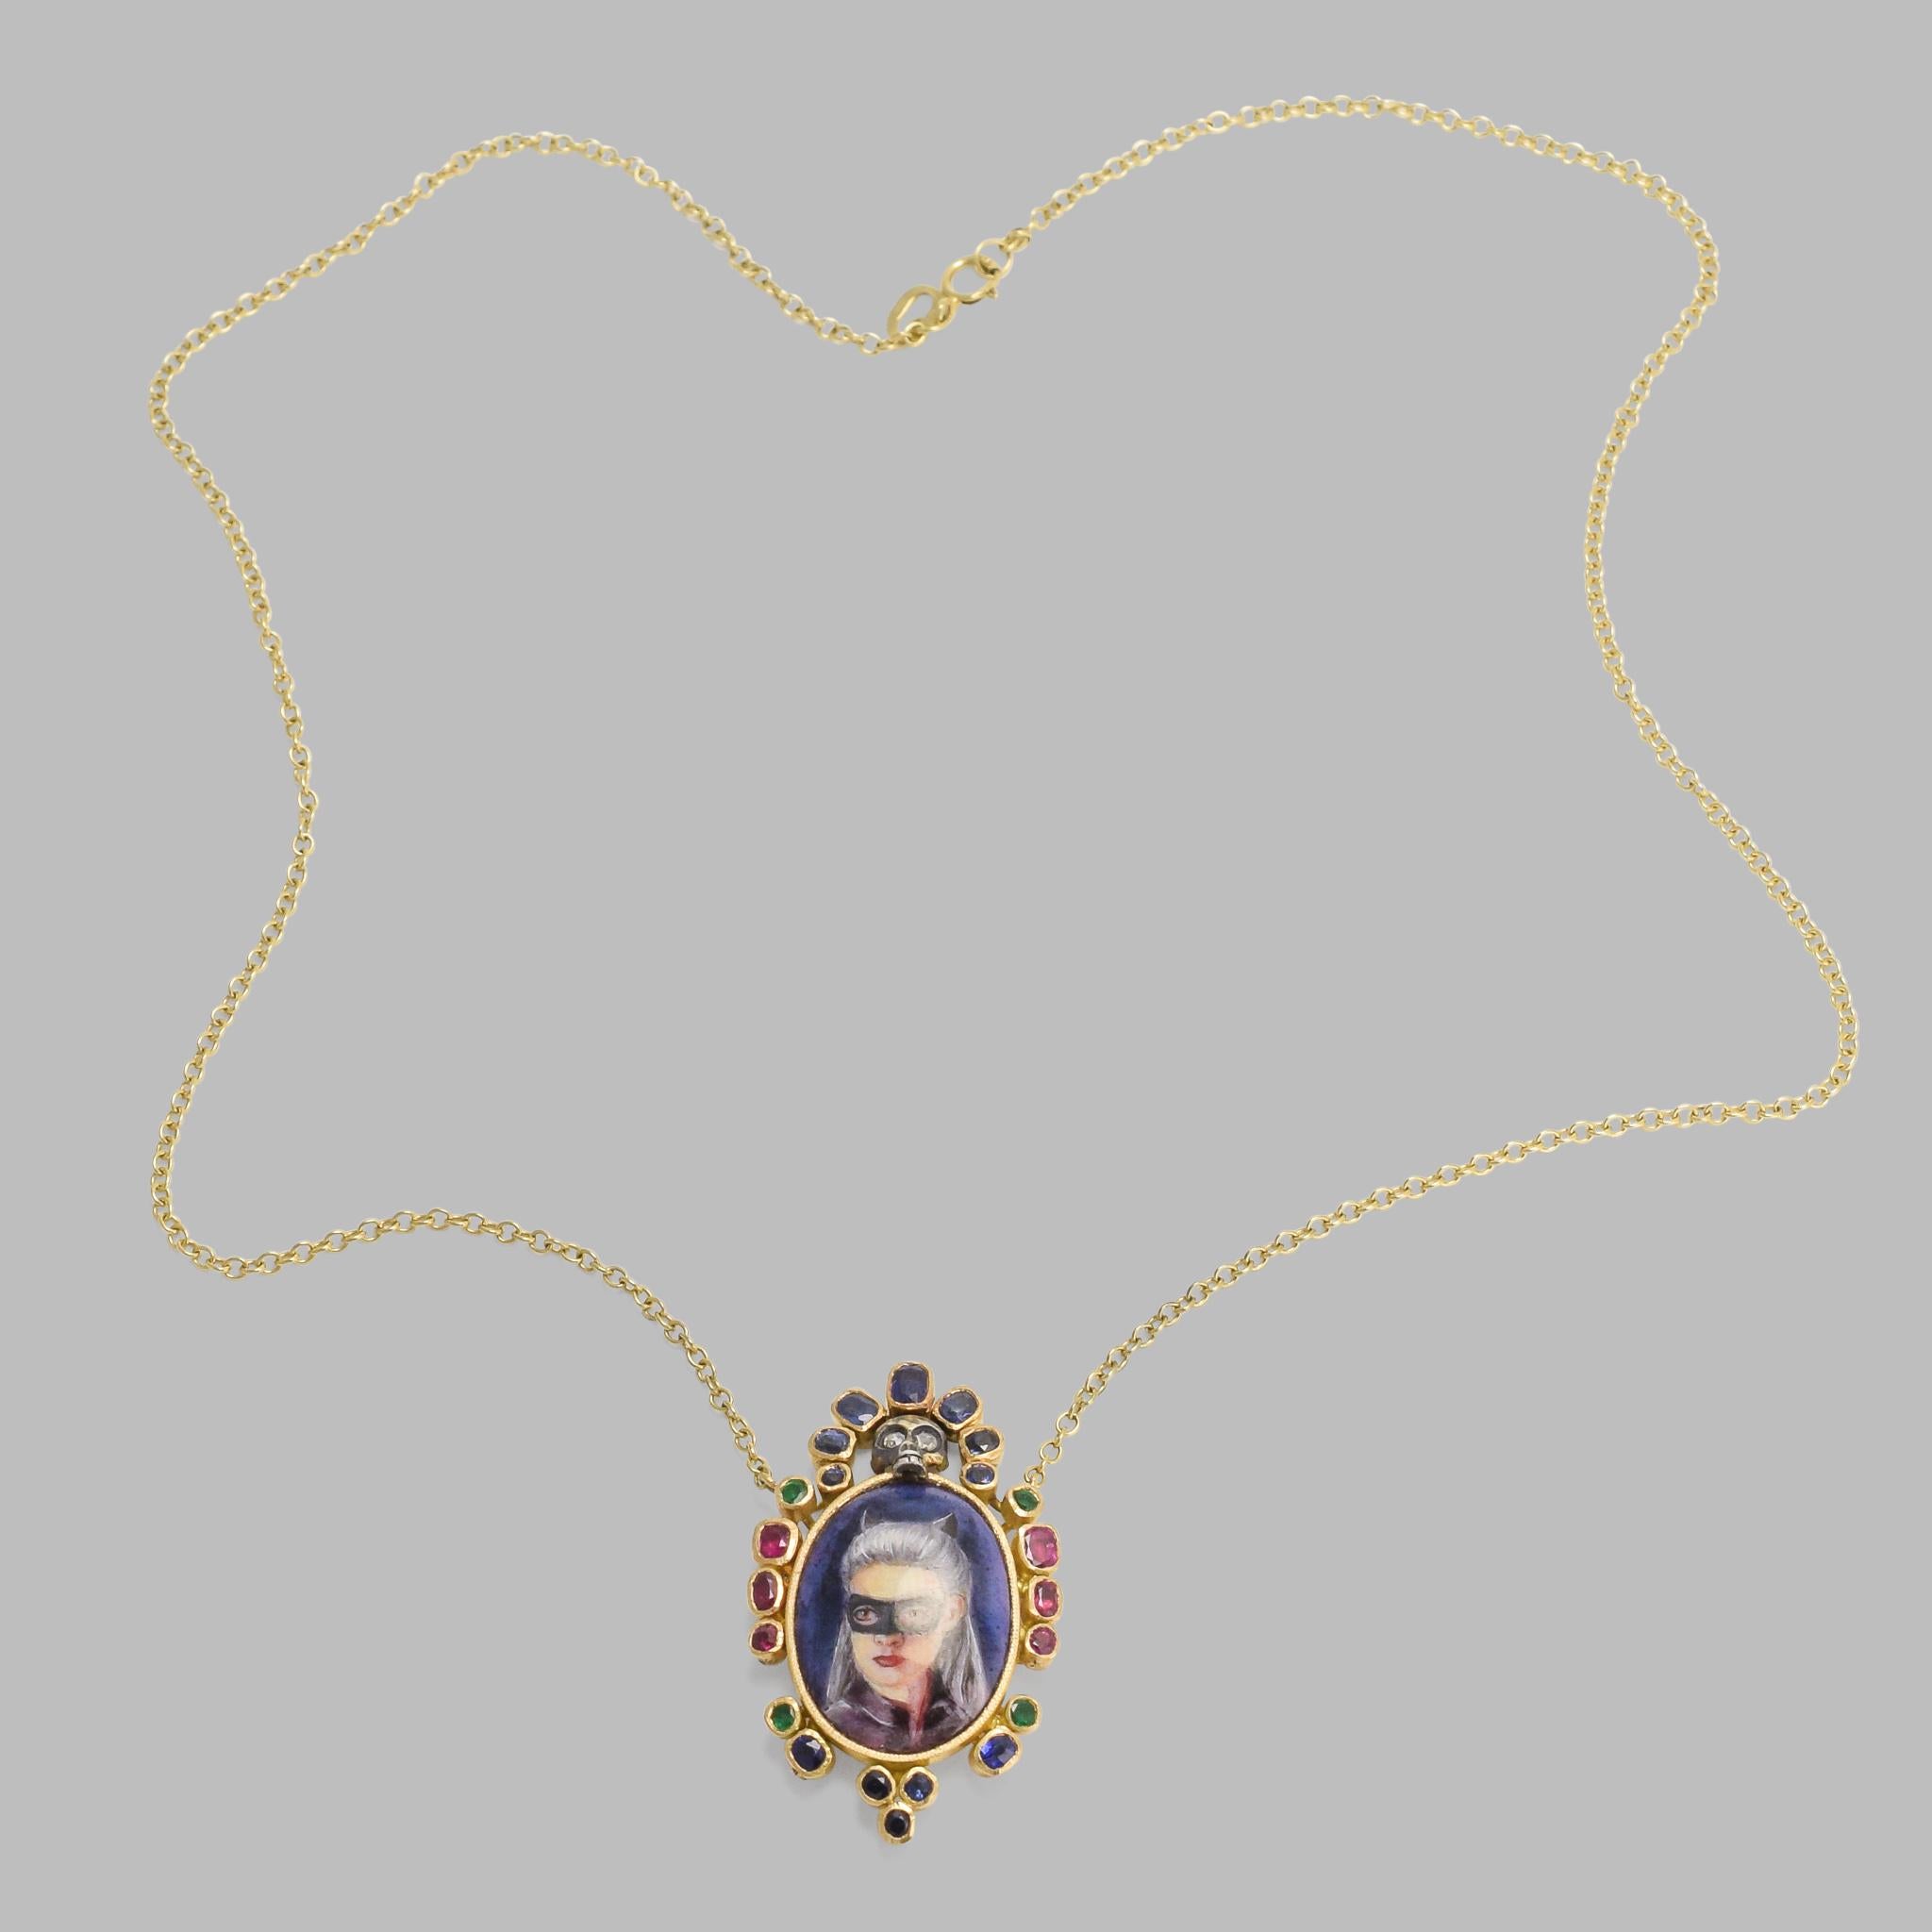 BL Bespoke Collection

A beautifully worked necklace, made by hand in the Georgian style. The finely painted portrait depicts a lady in masquerade with striking grey hair and cat ears. A diamond-eyed skull sits atop the portrait, with a border of